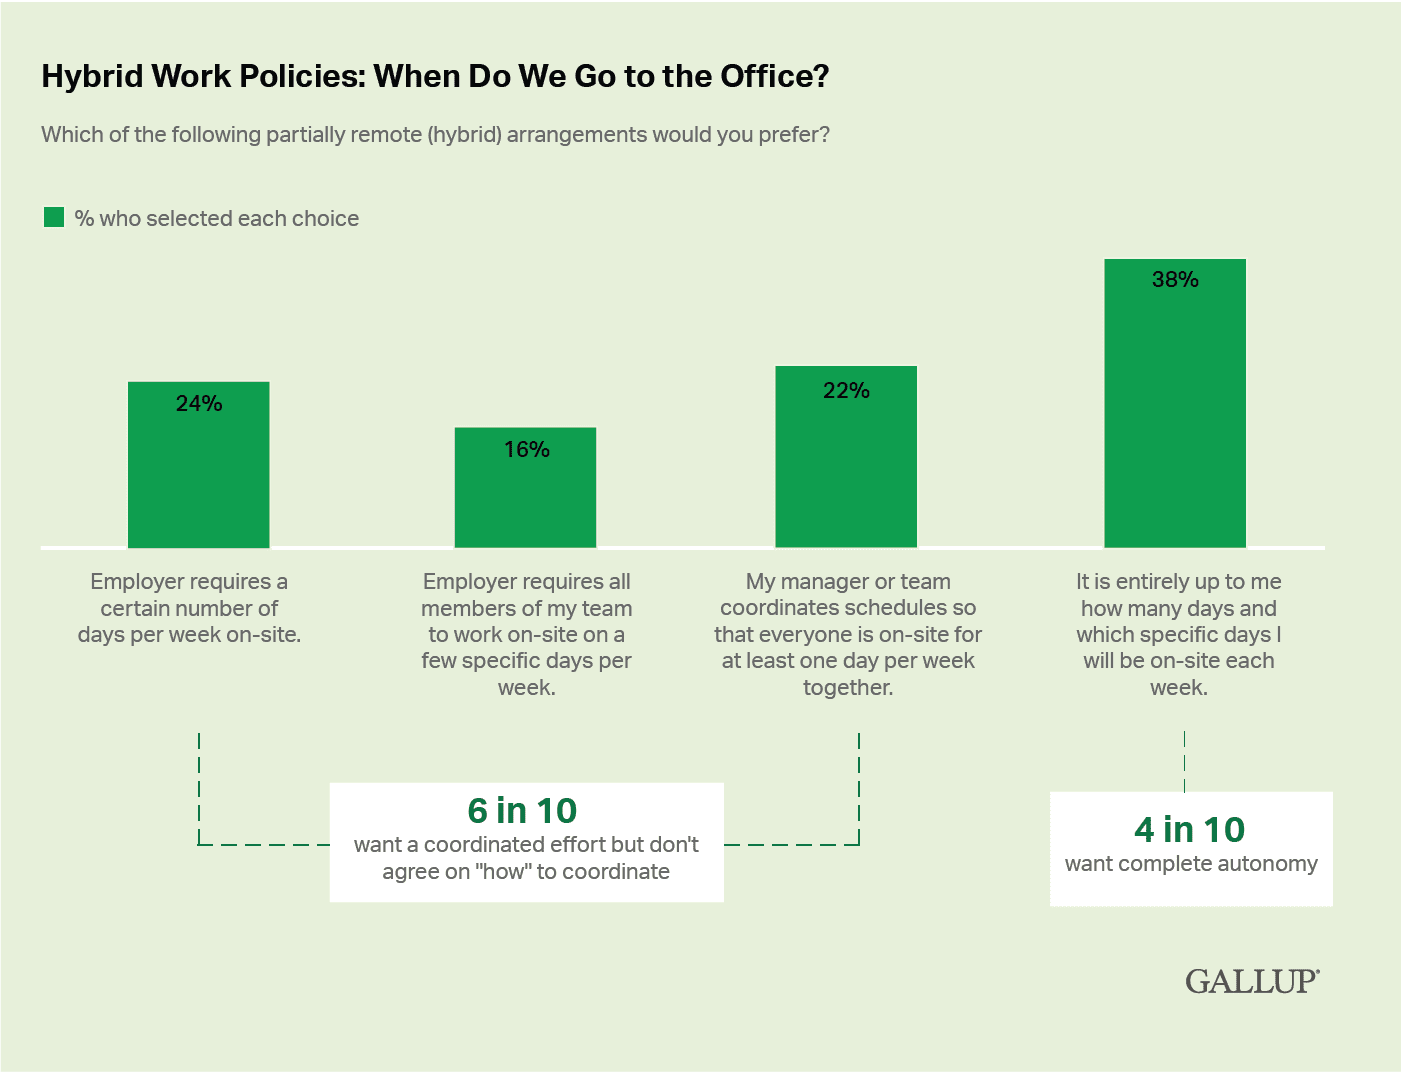 Green bar graphs showing hybrid work policies and when people go into the office